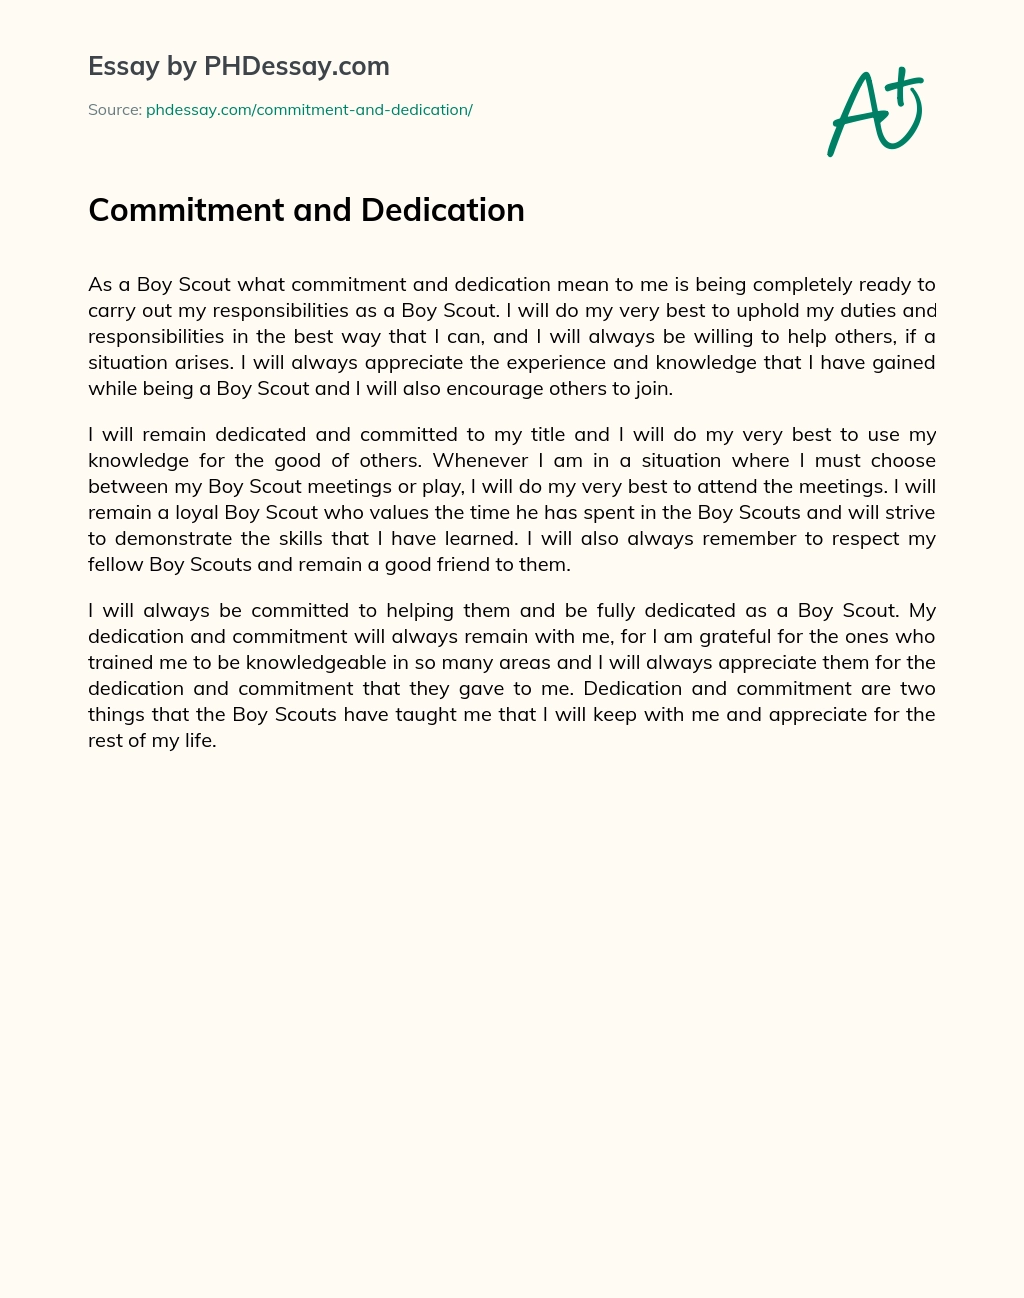 Commitment and Dedication essay